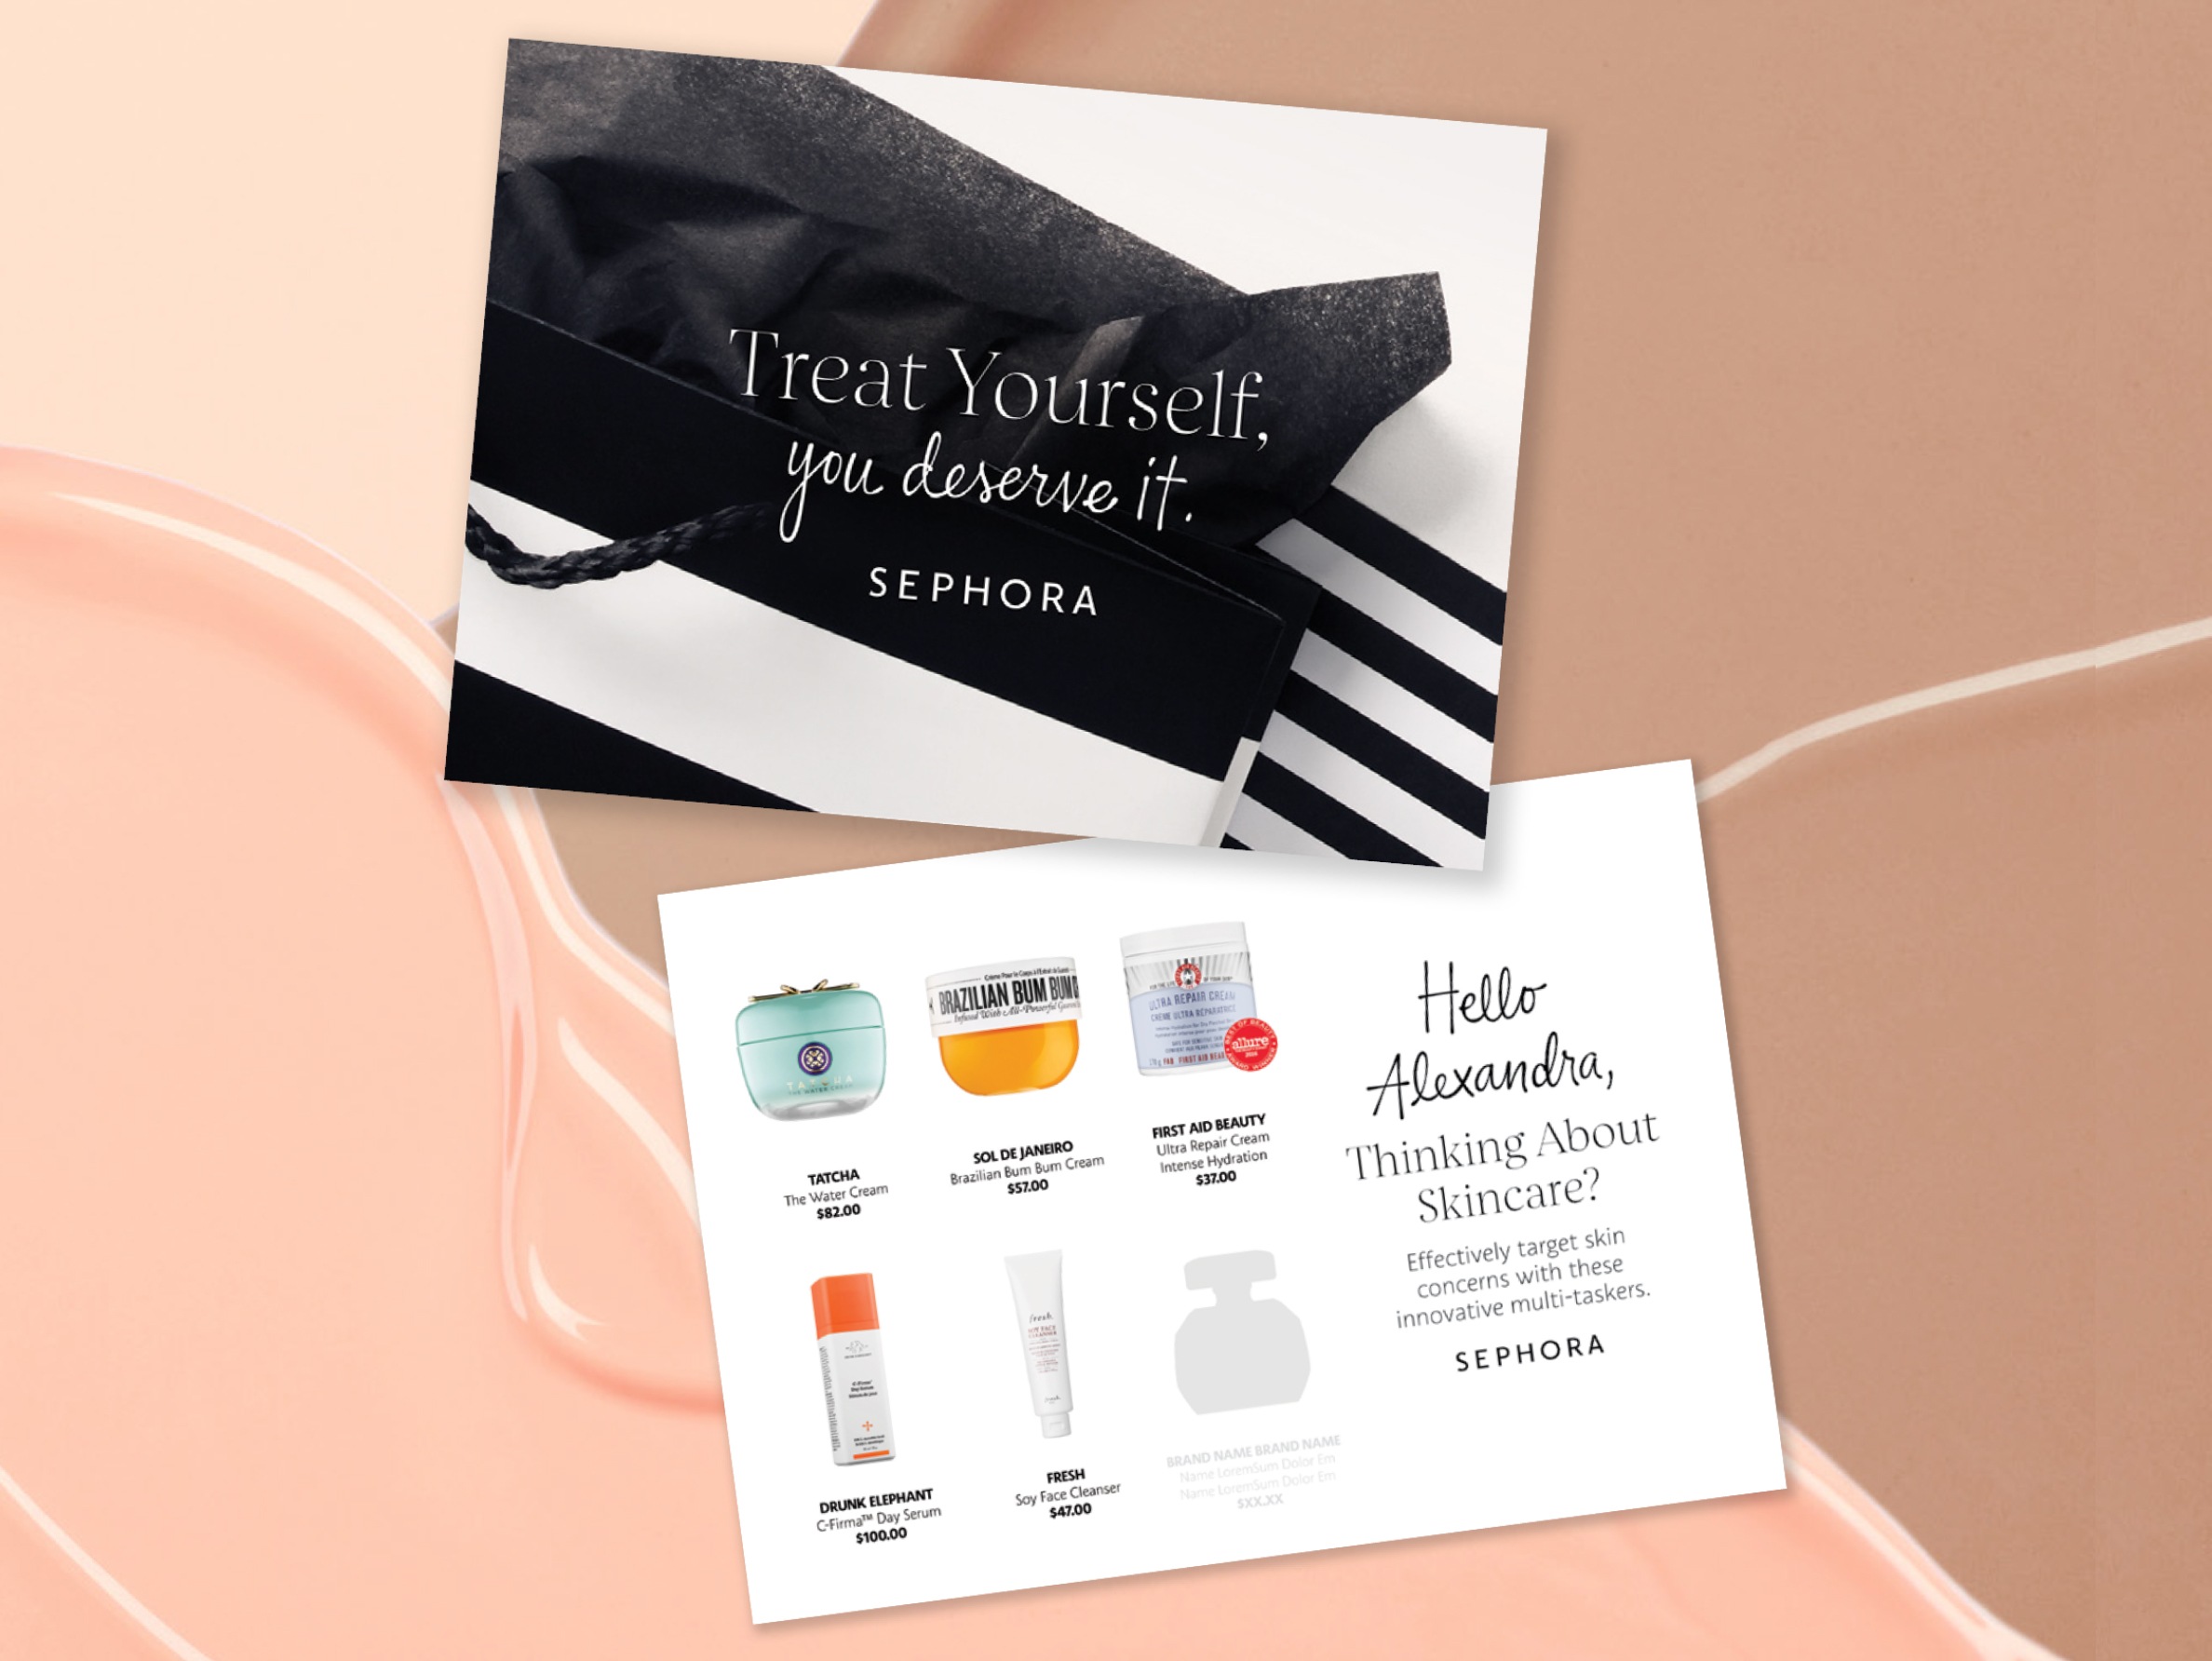 A piece of direct mail from Sephora. One side reads “Treat yourself, you deserve it.” On the other side there are images of skincare products.